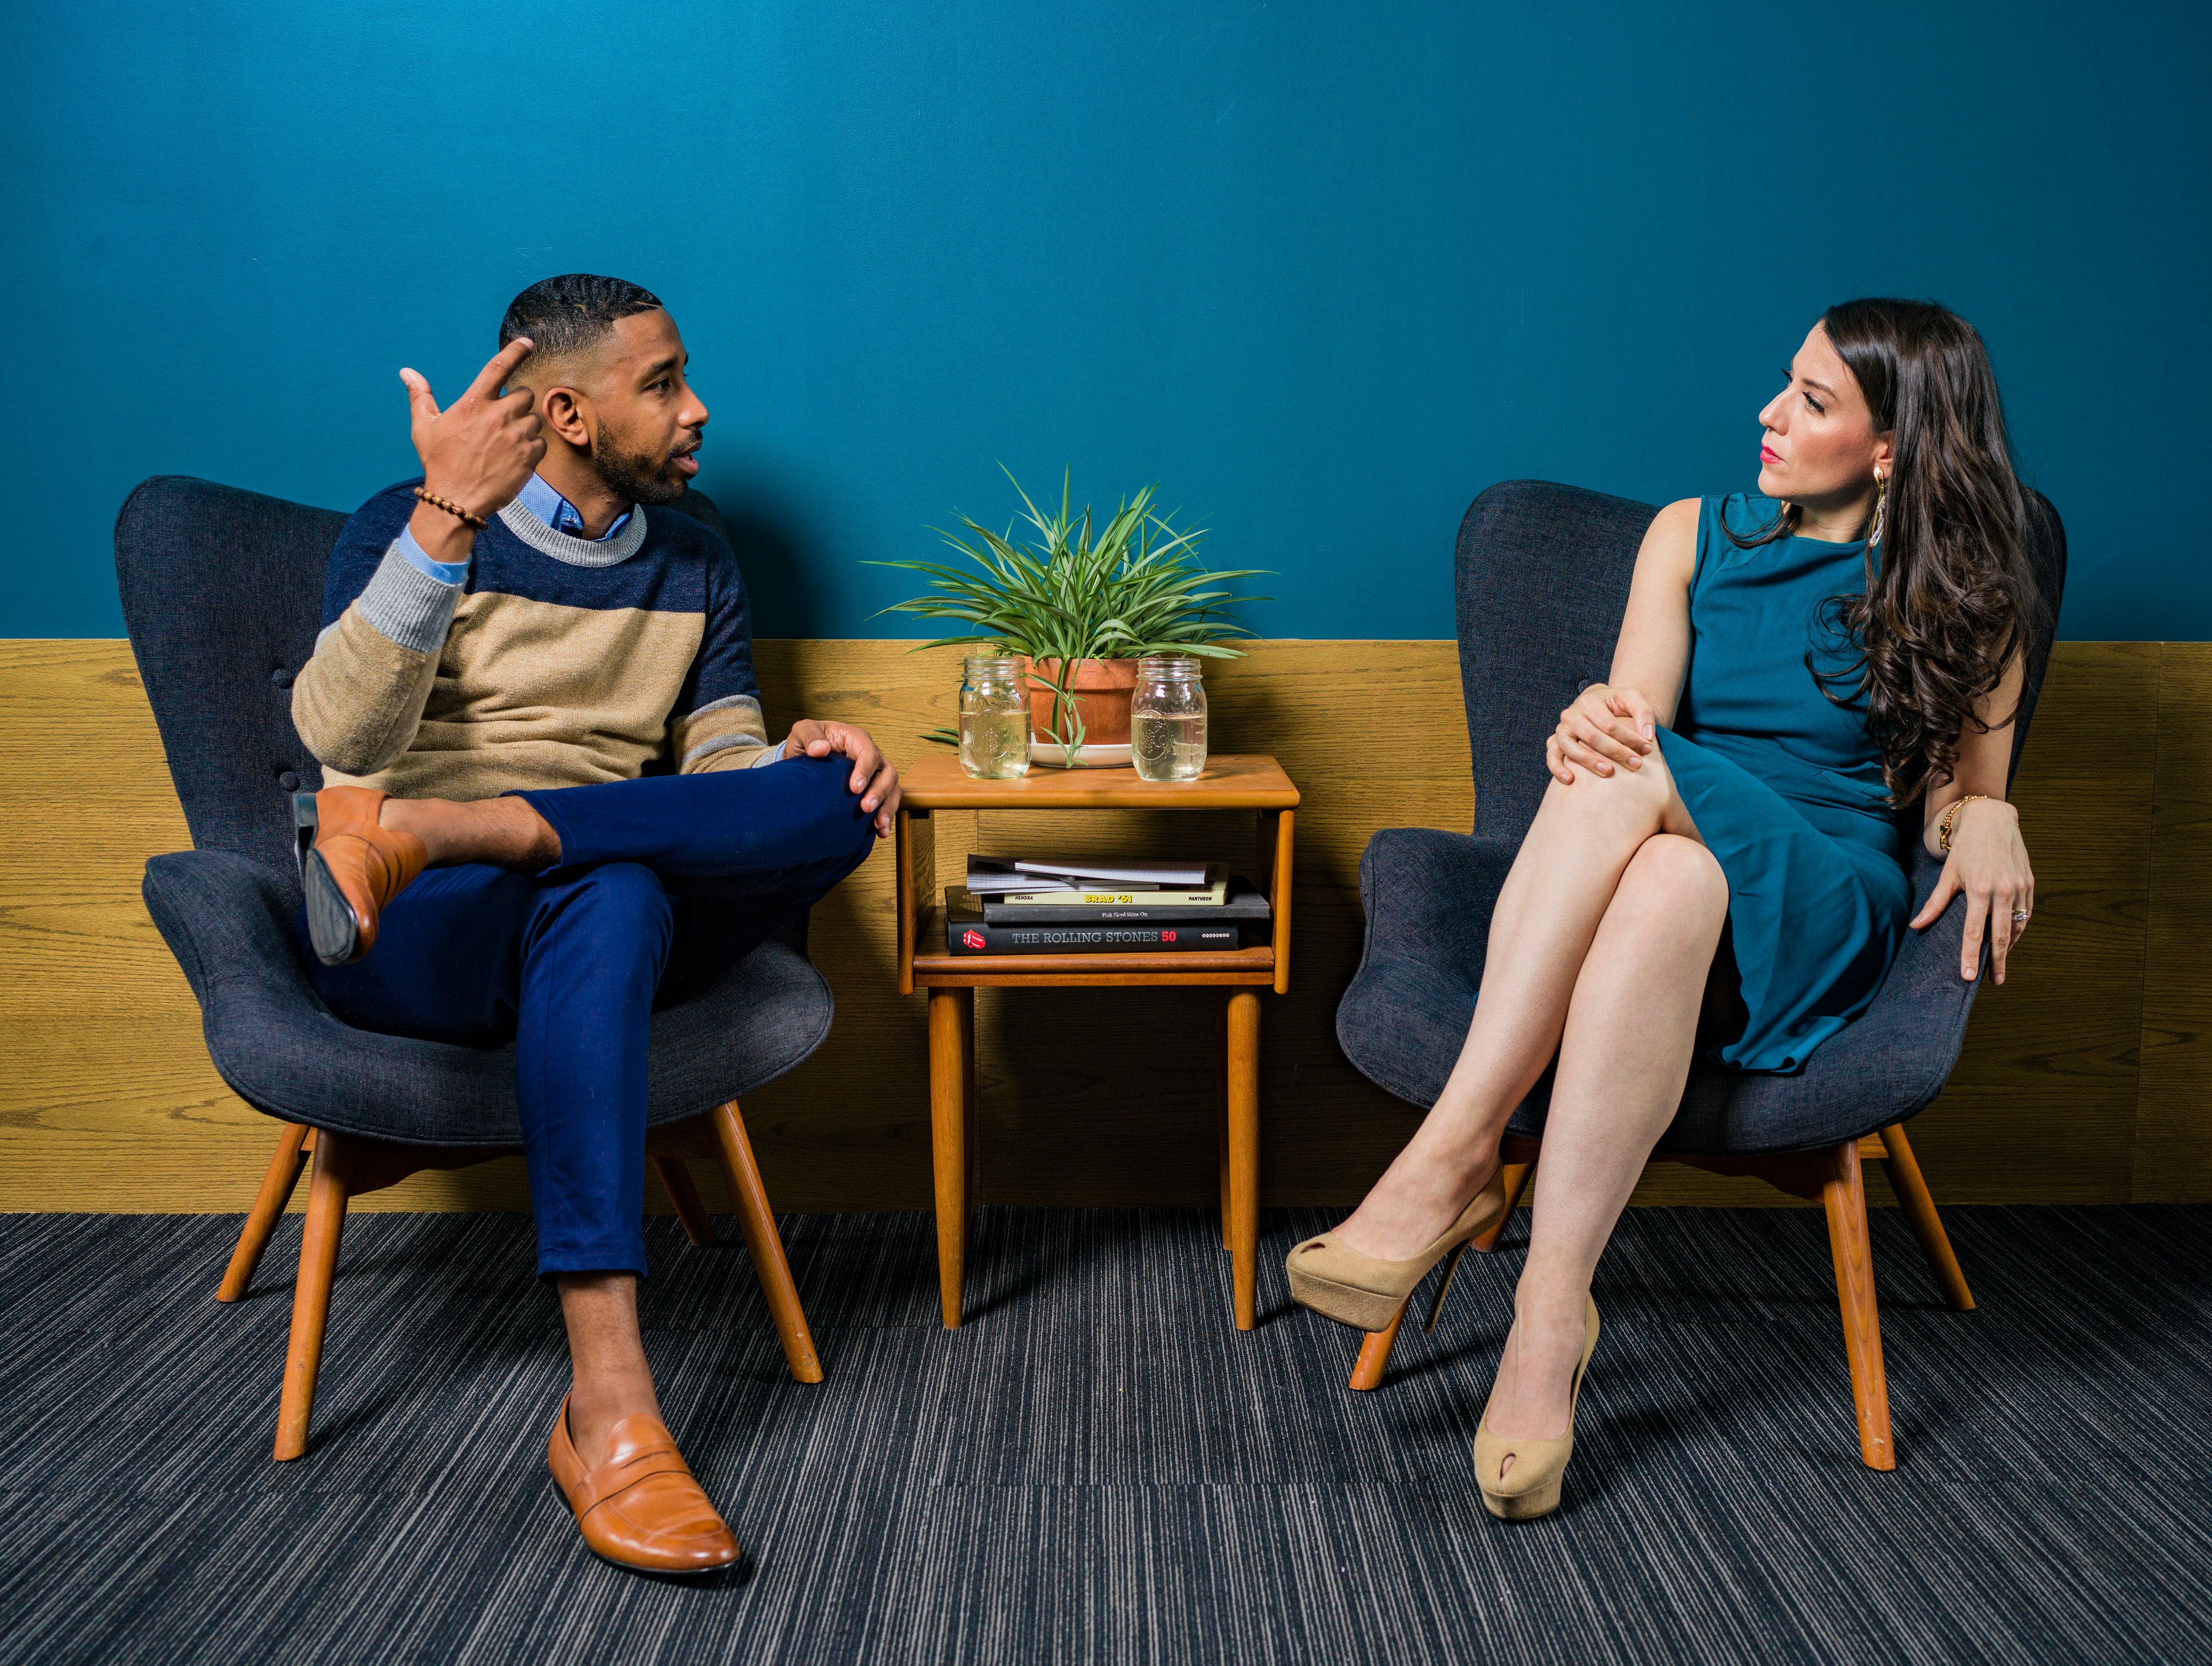 Two people sitting on opposite sides of a table while having a heated conversation | Source: Pexels